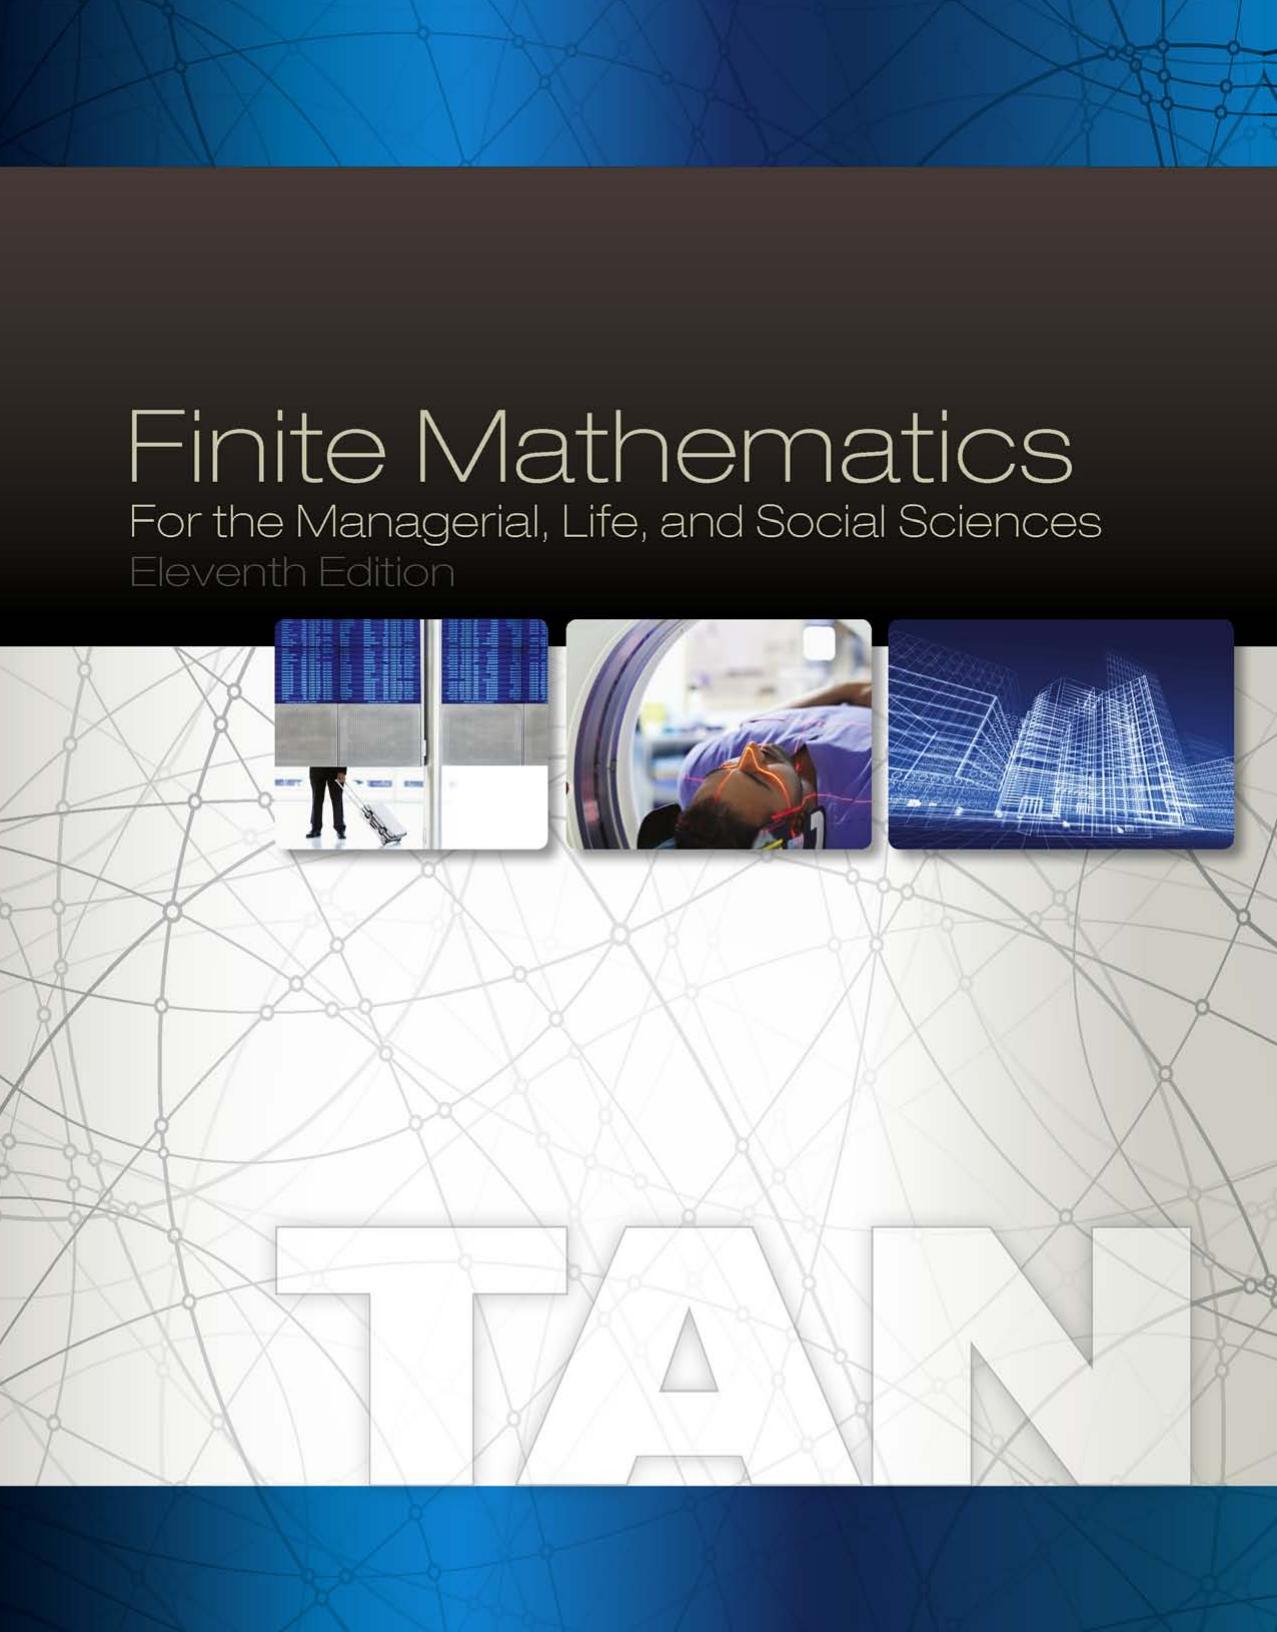 (eBook PDF)Finite Mathematics for the Managerial, Life, and Social Sciences, 11th Edition by Soo T. Tan